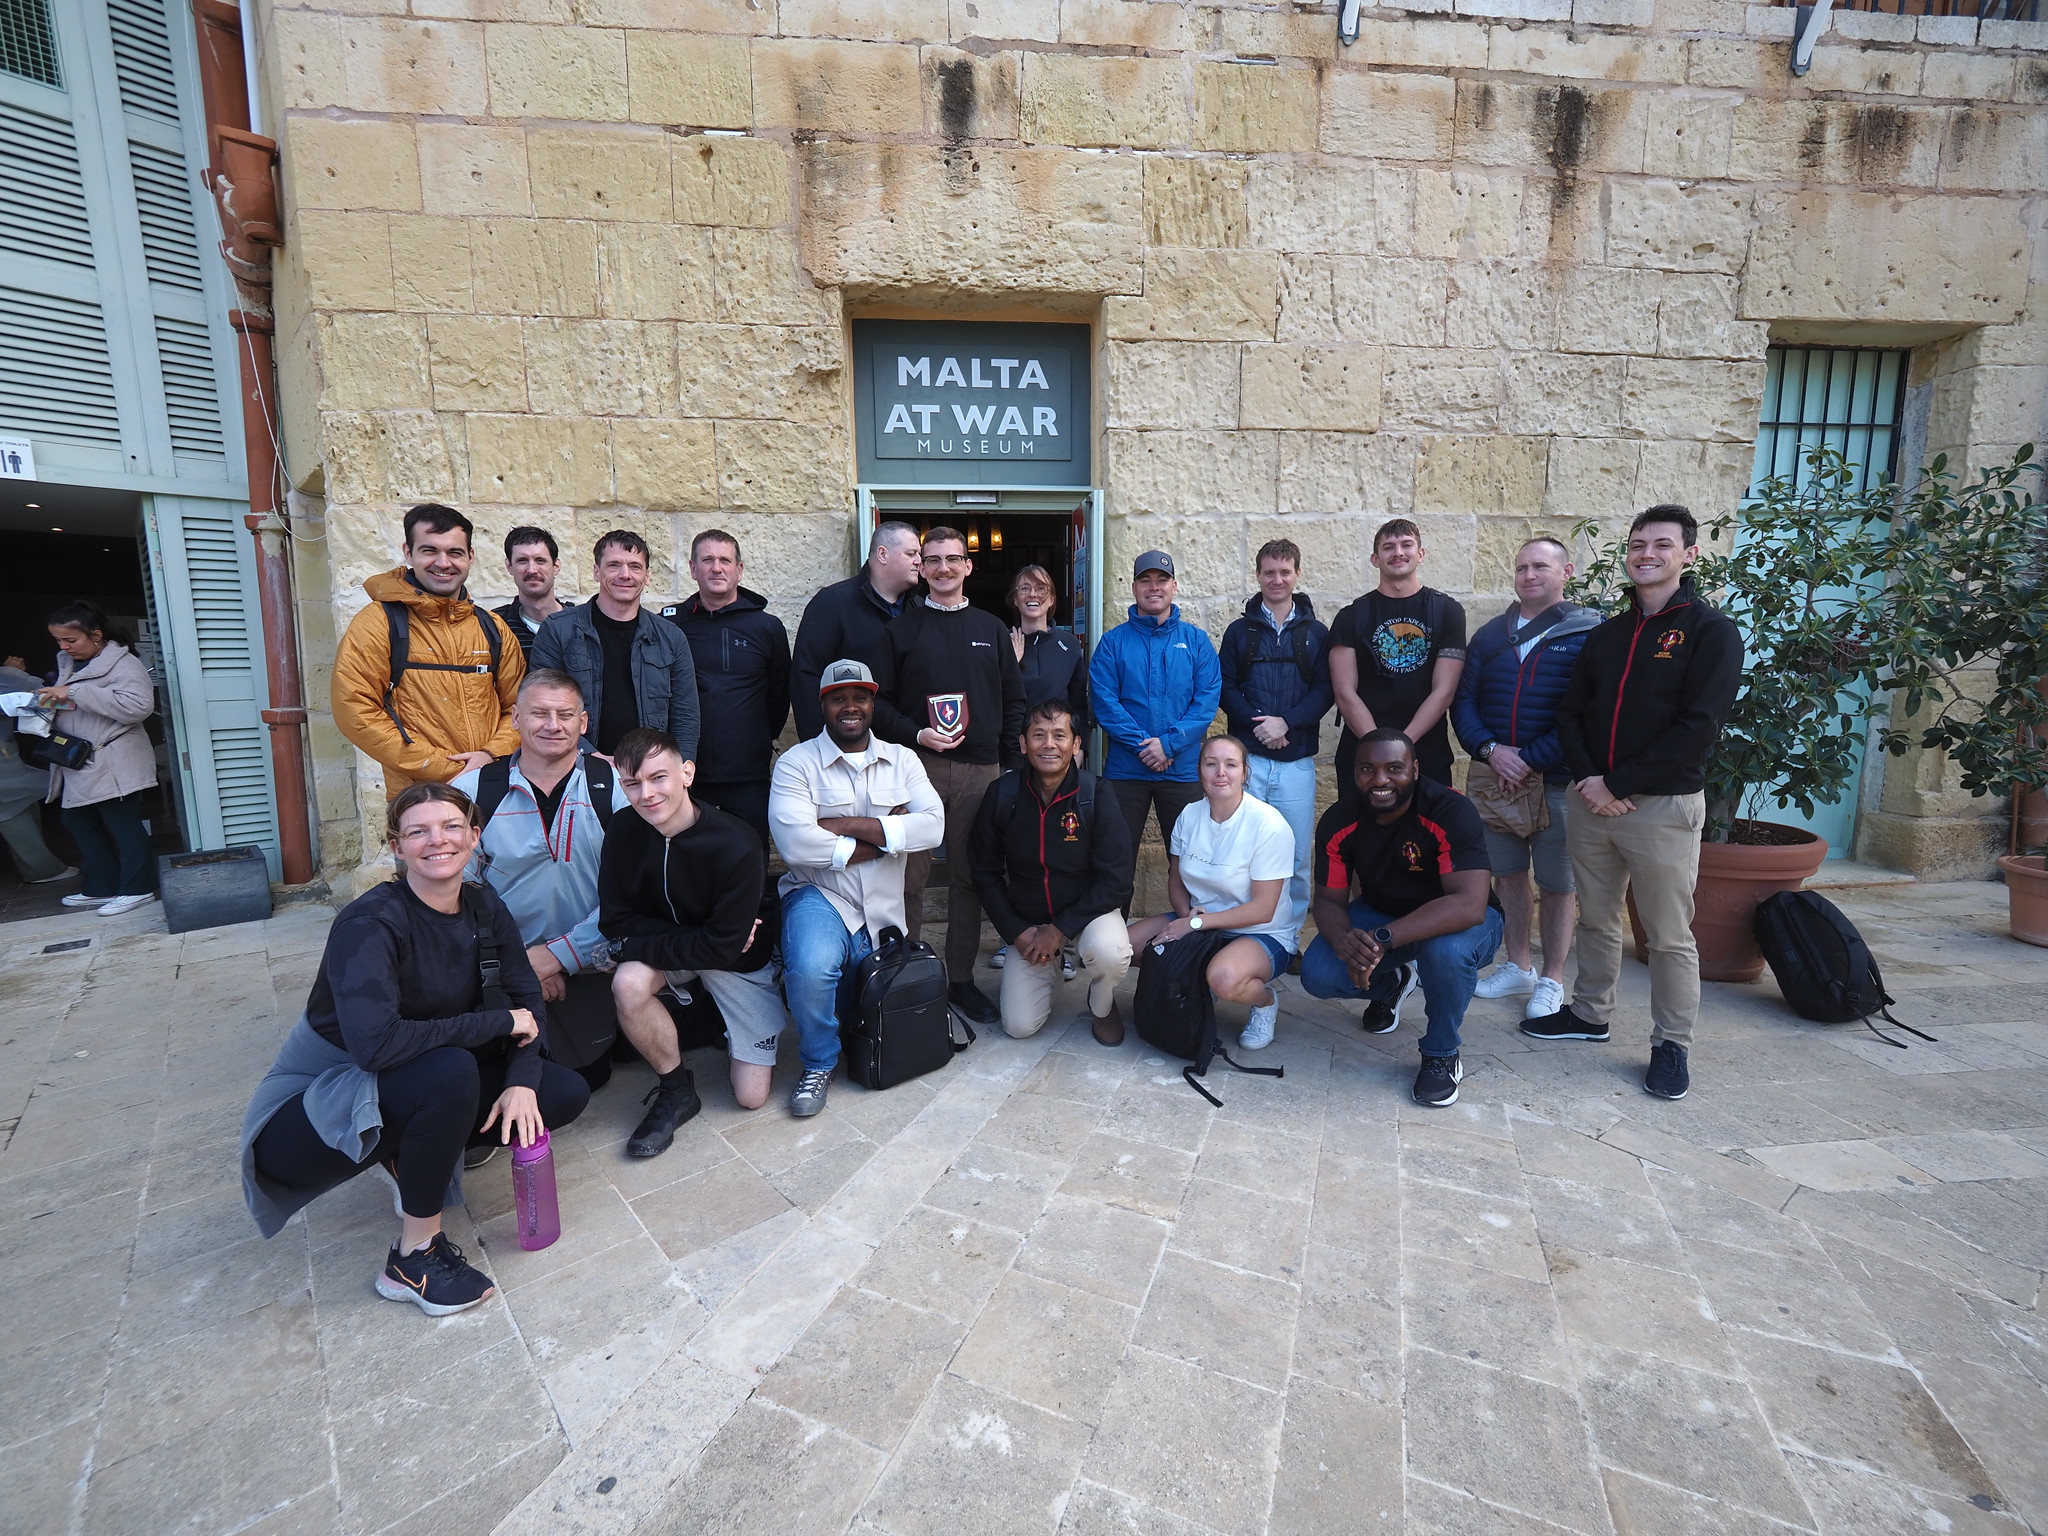 The group in front of the Malta at war museum